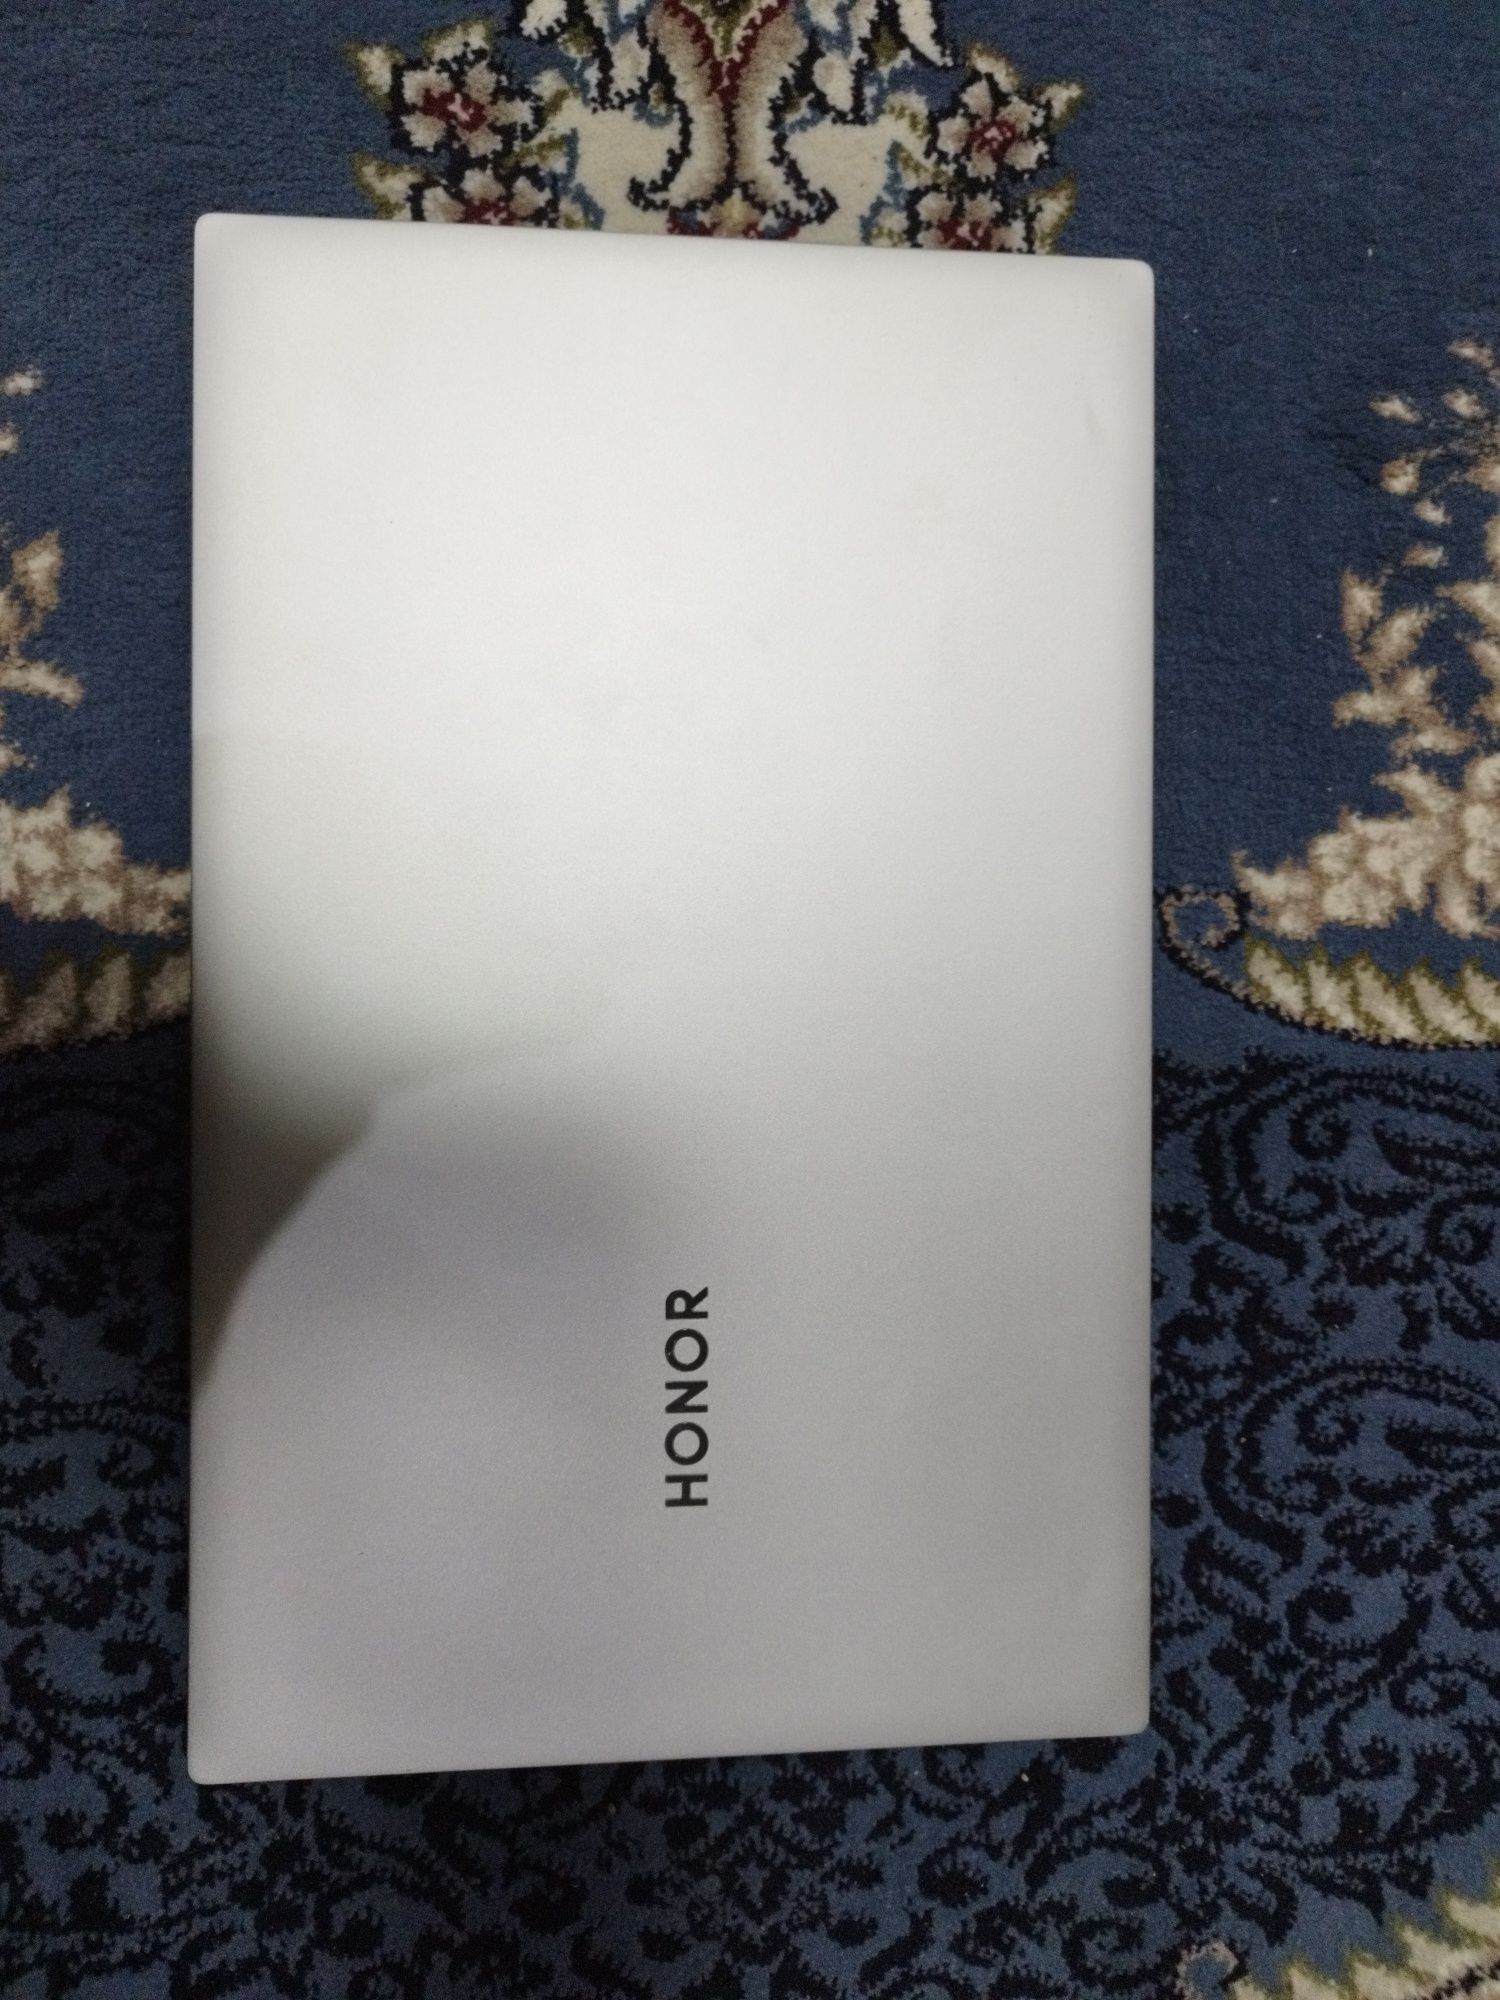 Honor magicbook pro